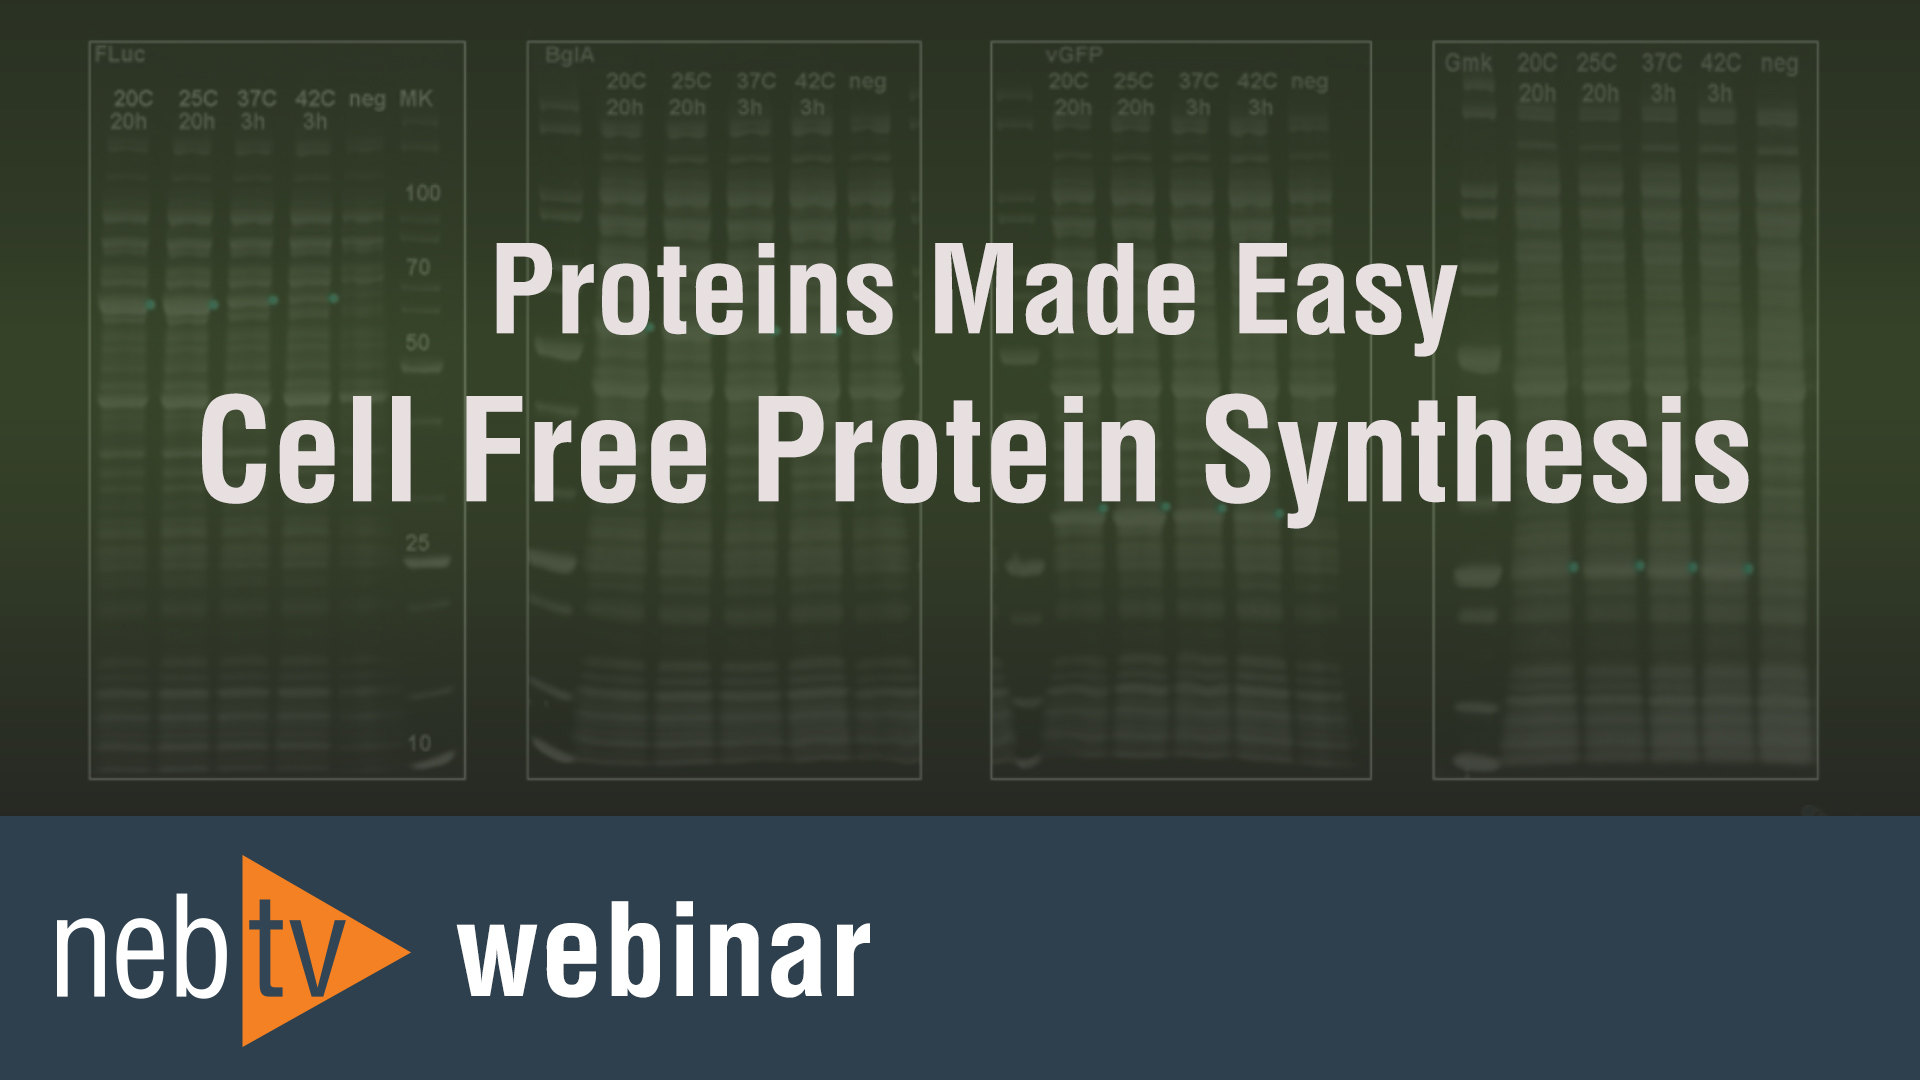 NEBTV_Proteins-Made-Easy-Cell-Free-Protein-Synthesis_3